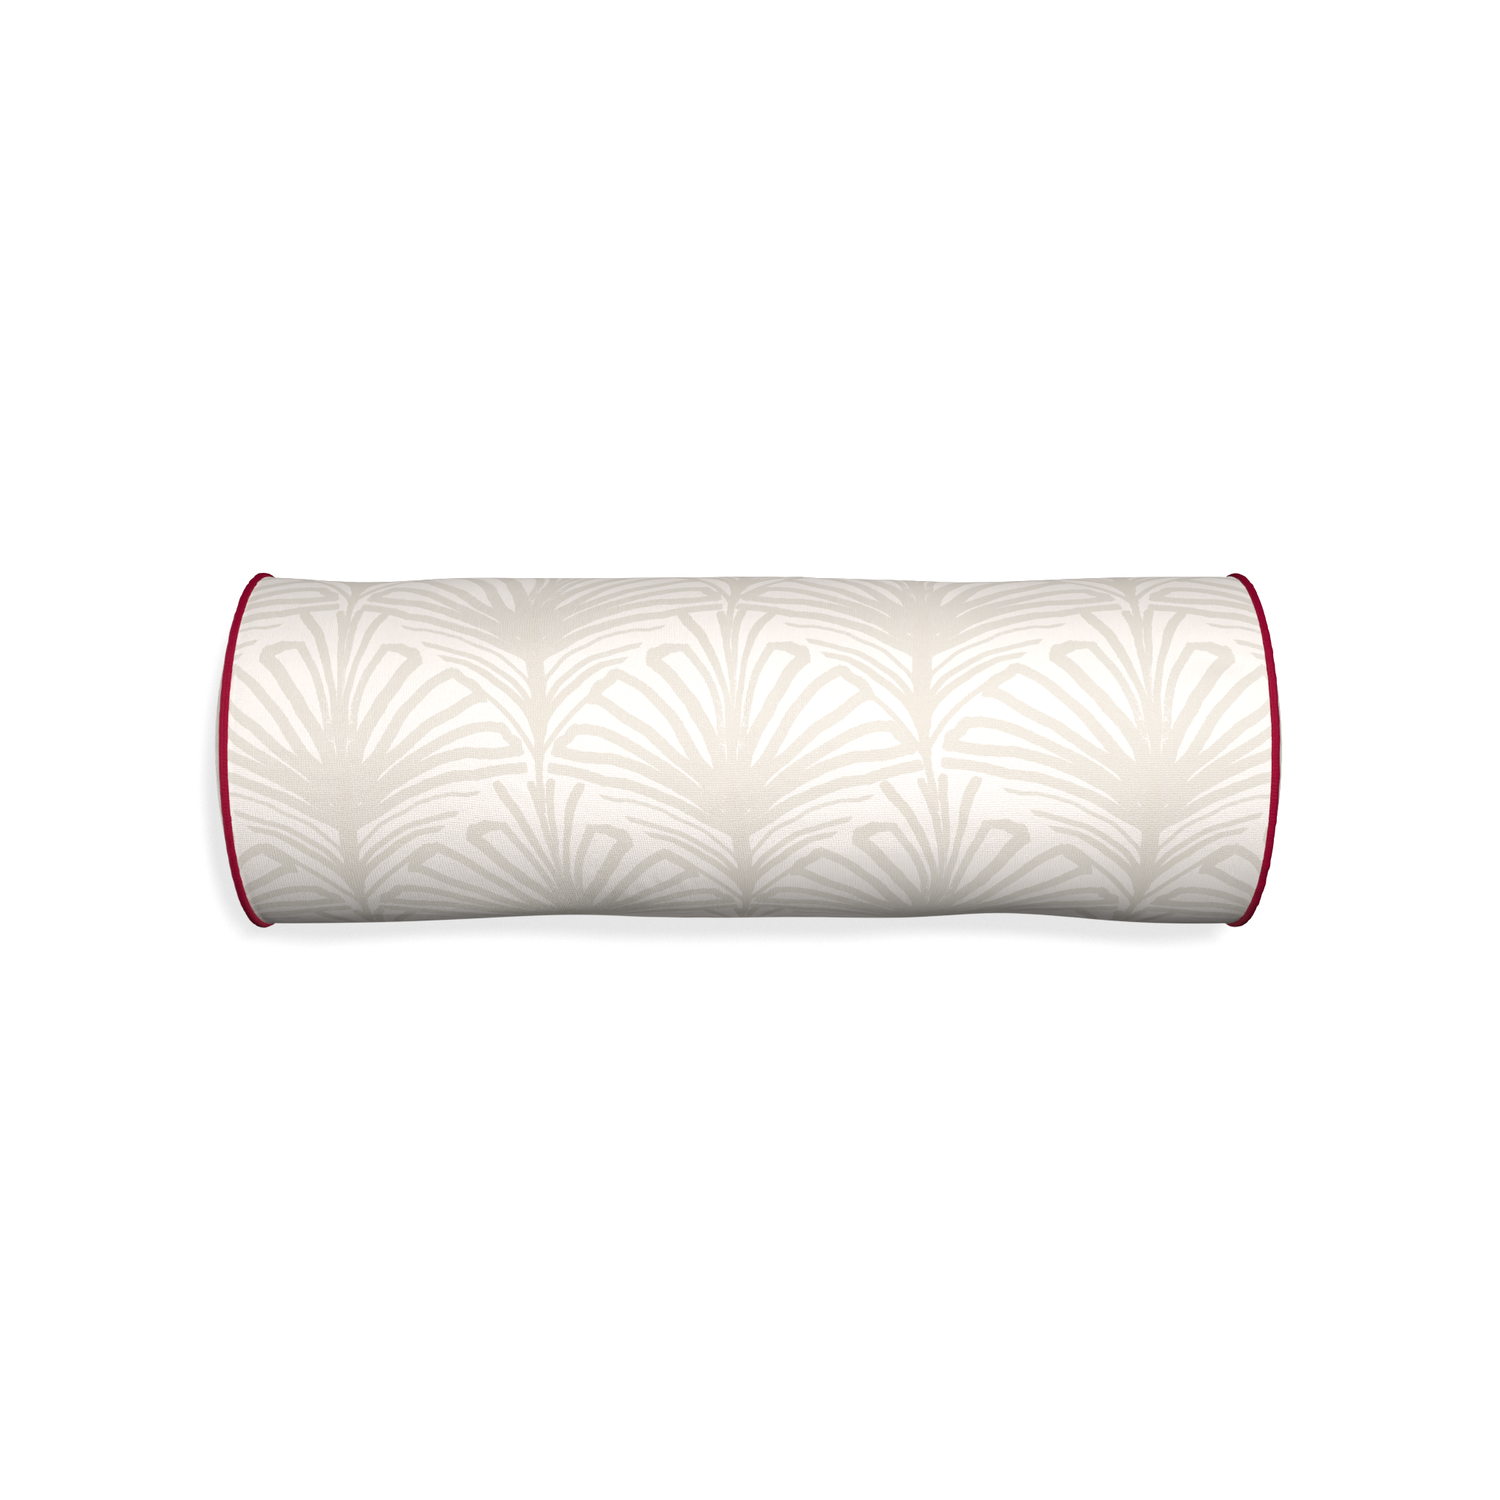 Bolster suzy sand custom beige palmpillow with raspberry piping on white background